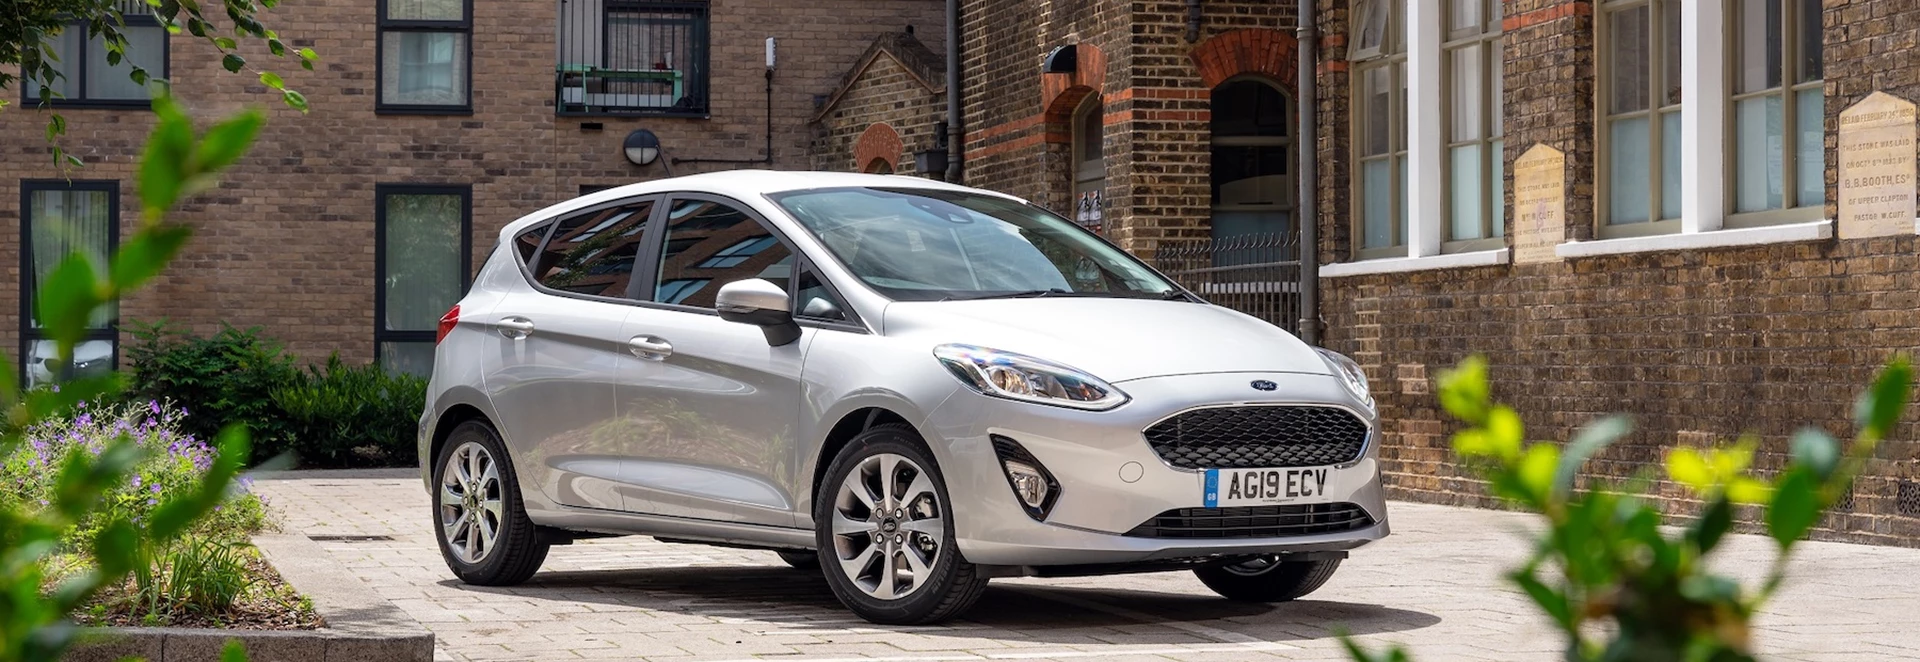 Ford Fiesta Trend 2020 Review 